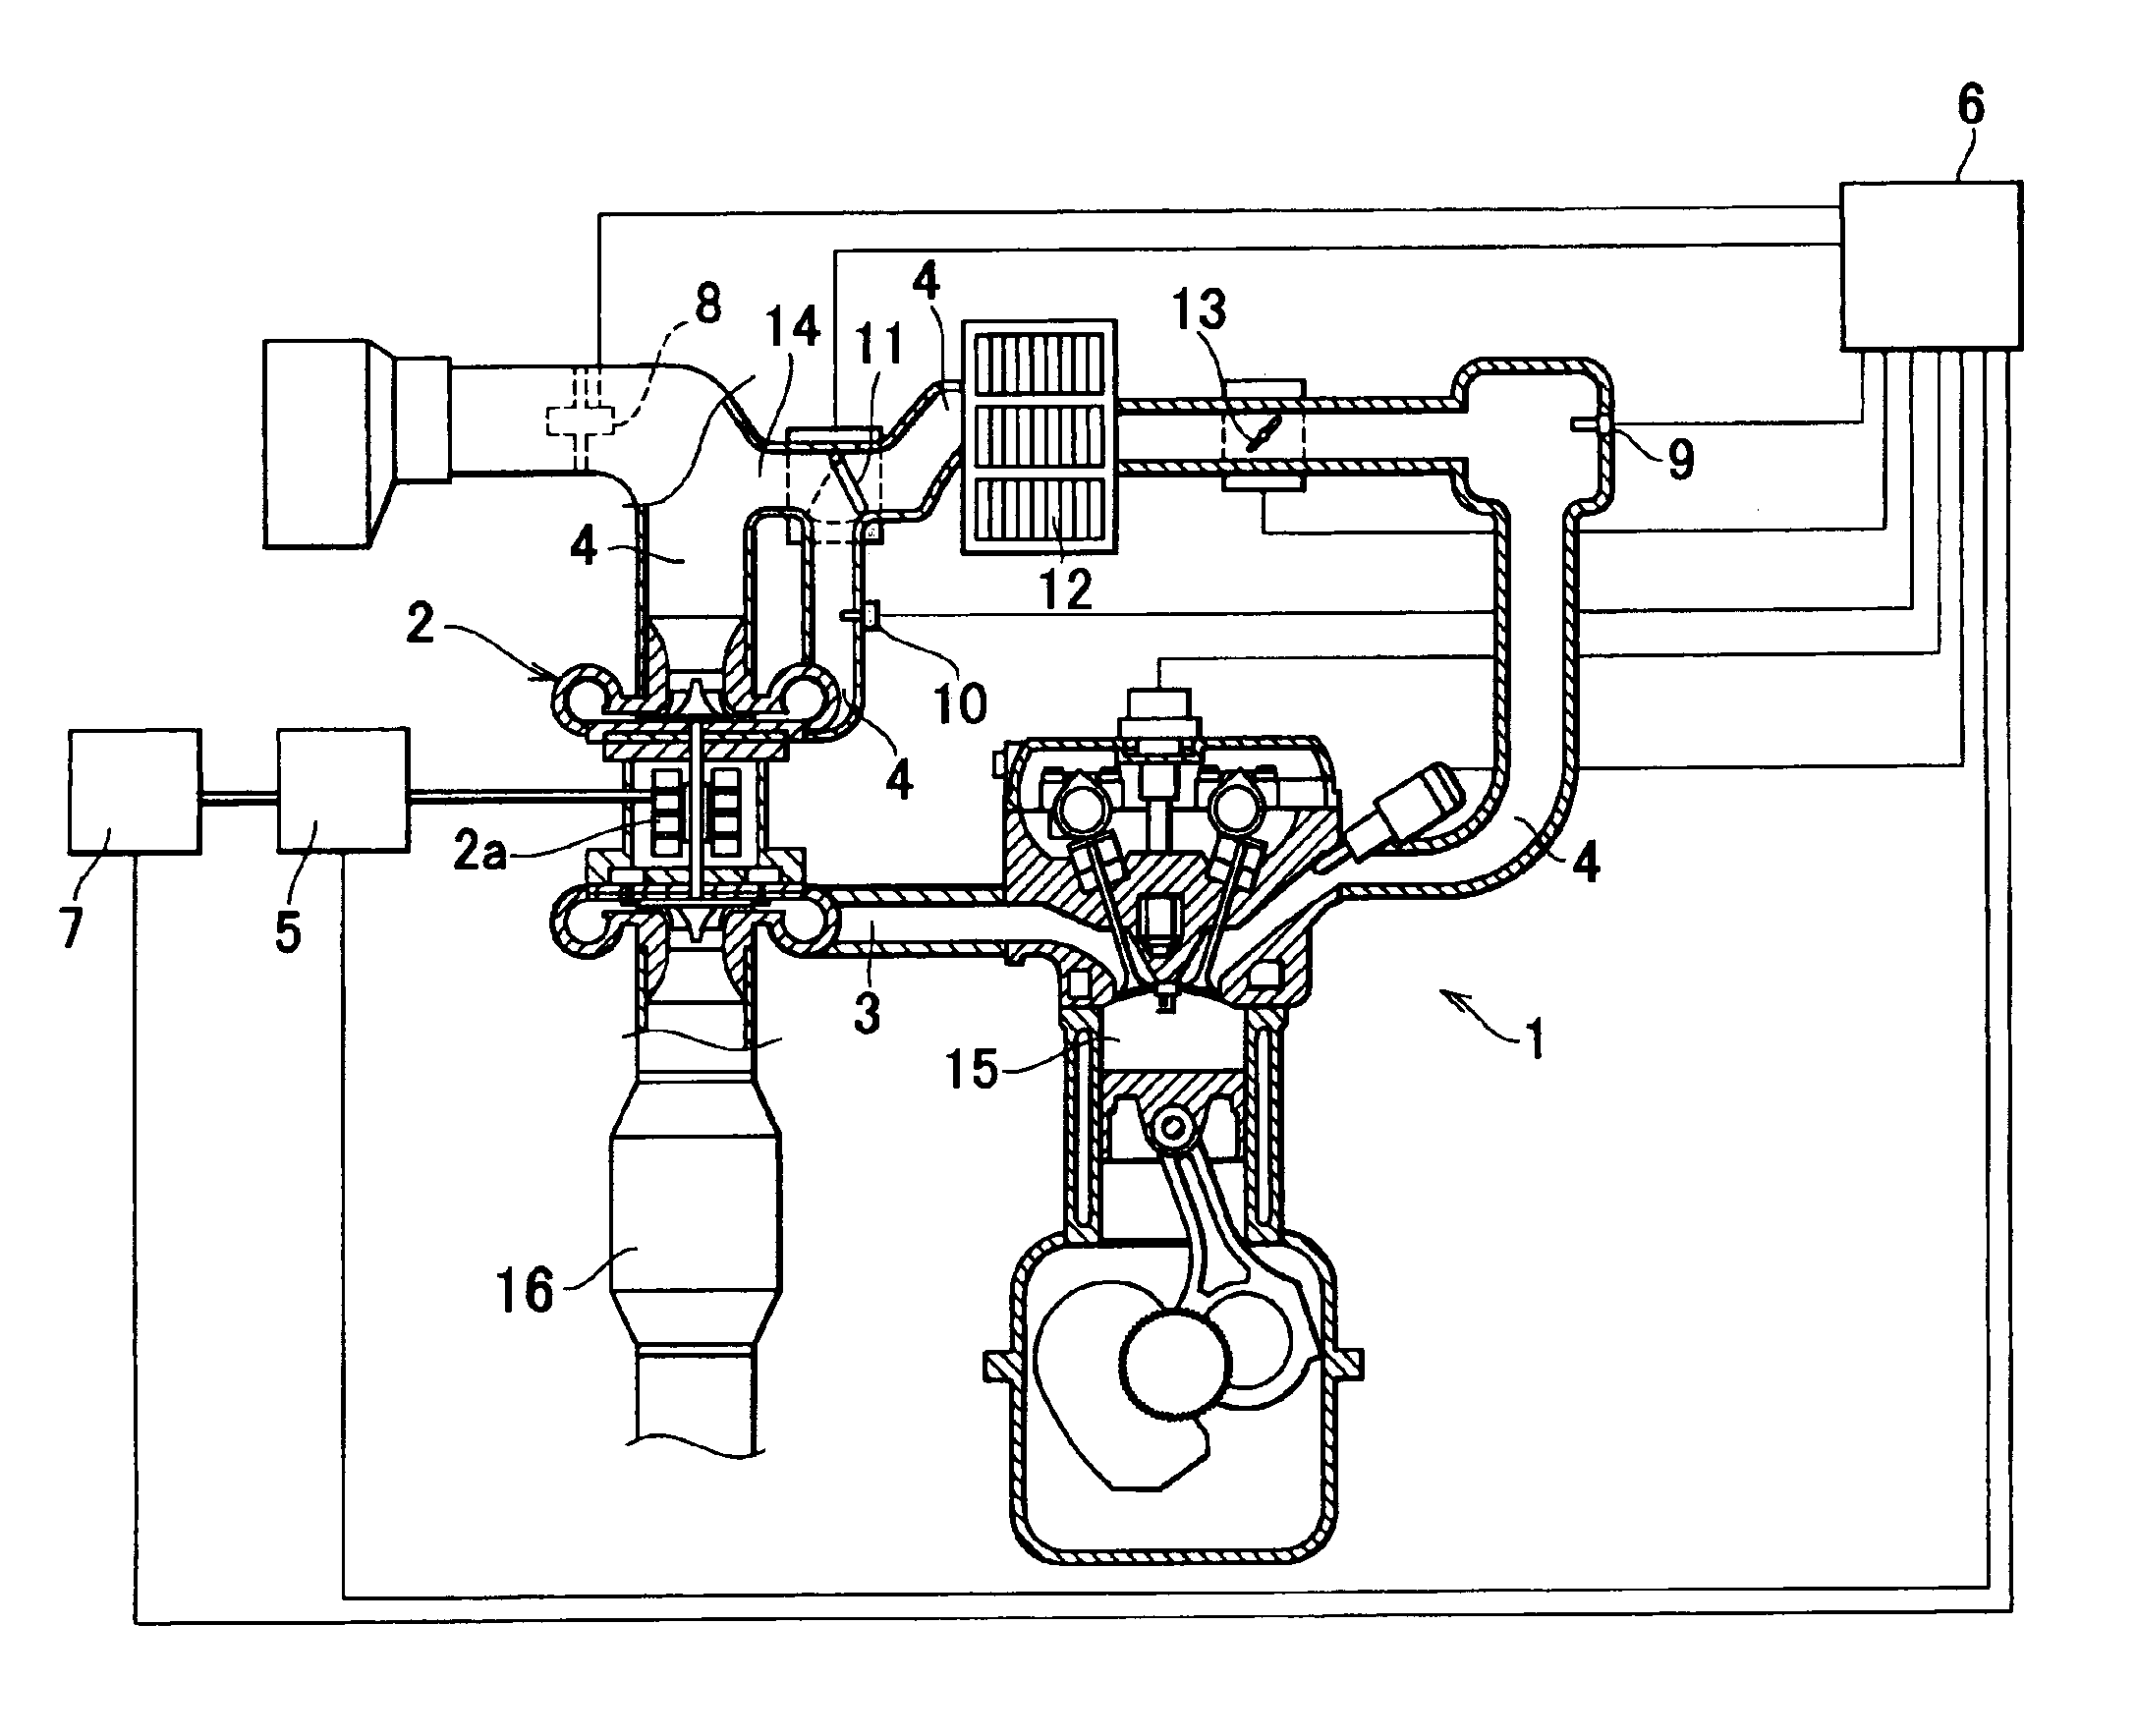 Control apparatus for internal combustion engine having motor-driven supercharger